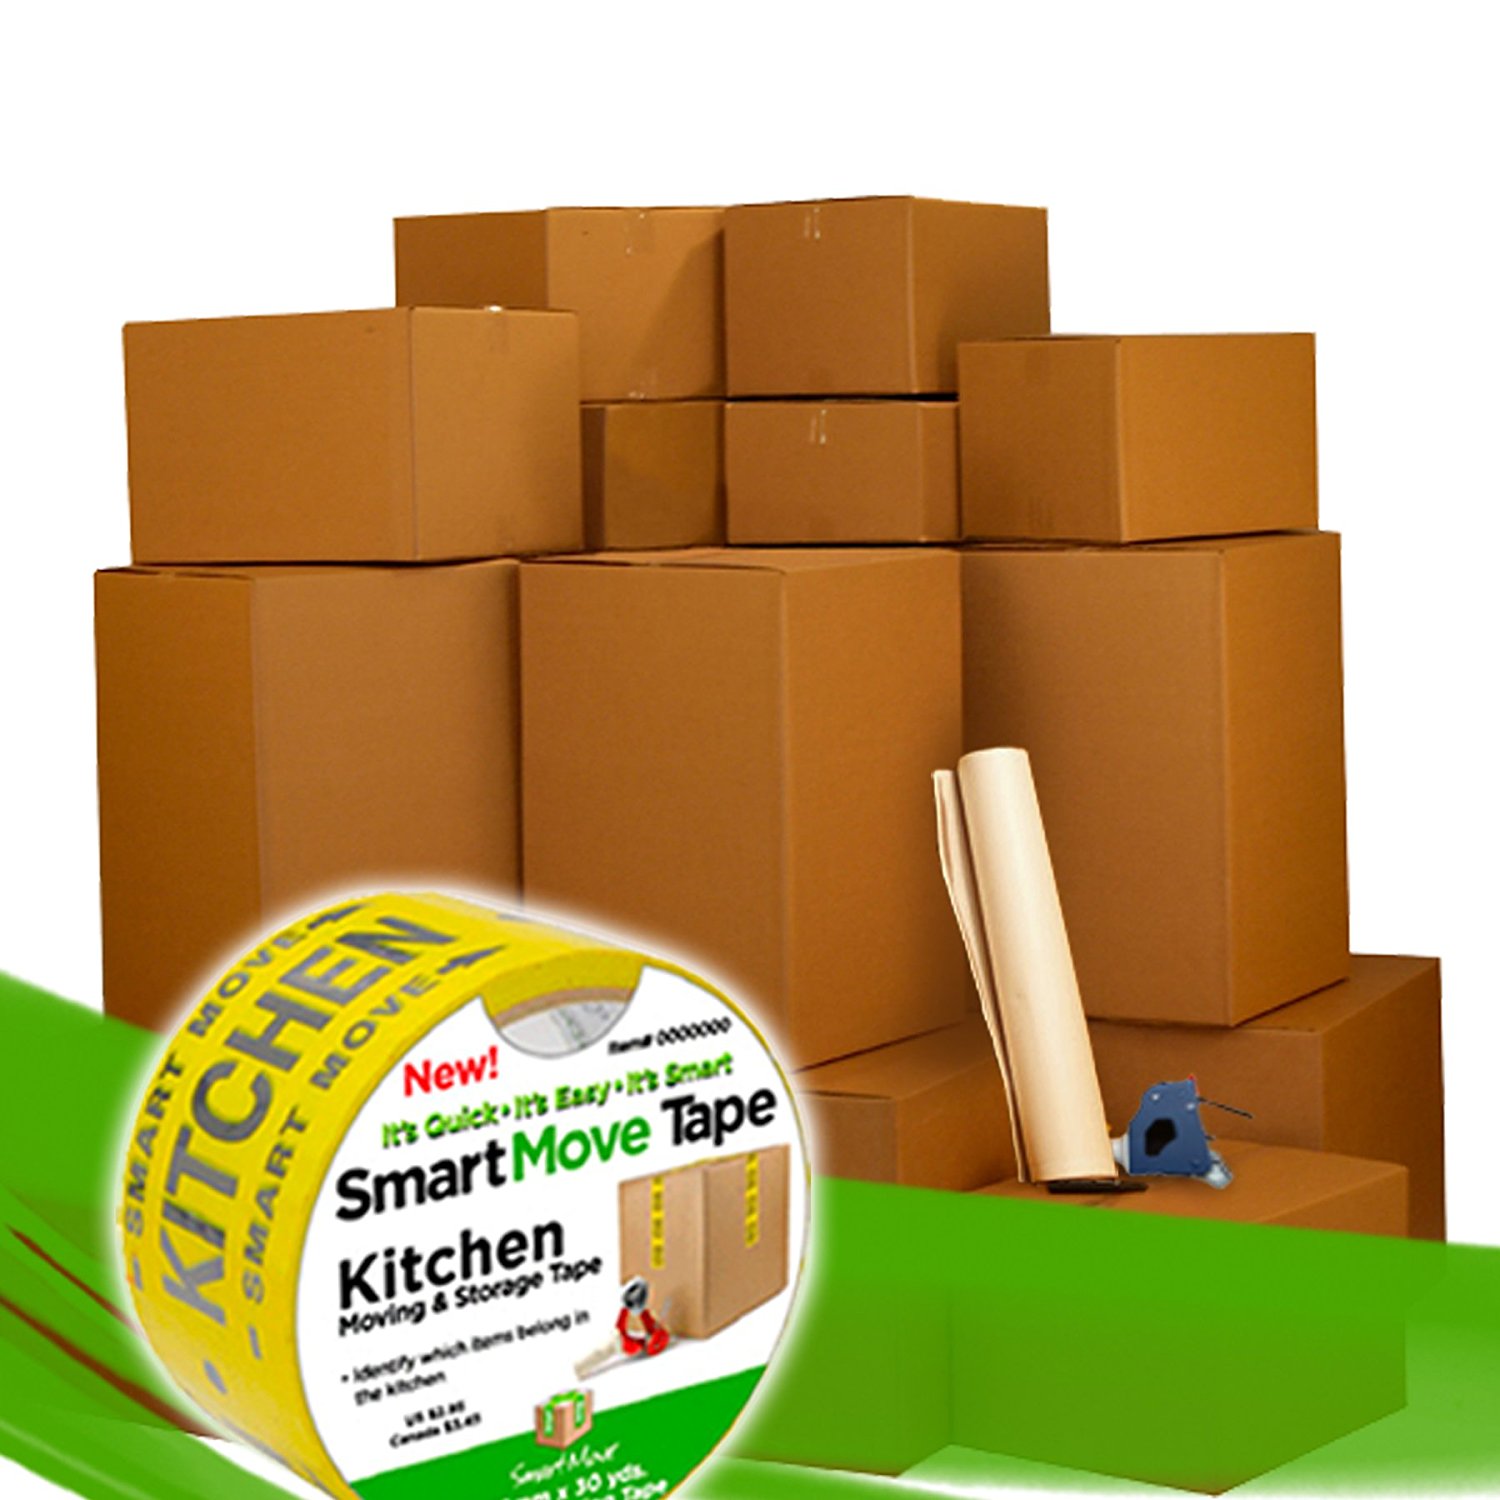 Amazon.com: UBOXES 5 Room Moving Kit - 62 big moving boxes & $94 of ...